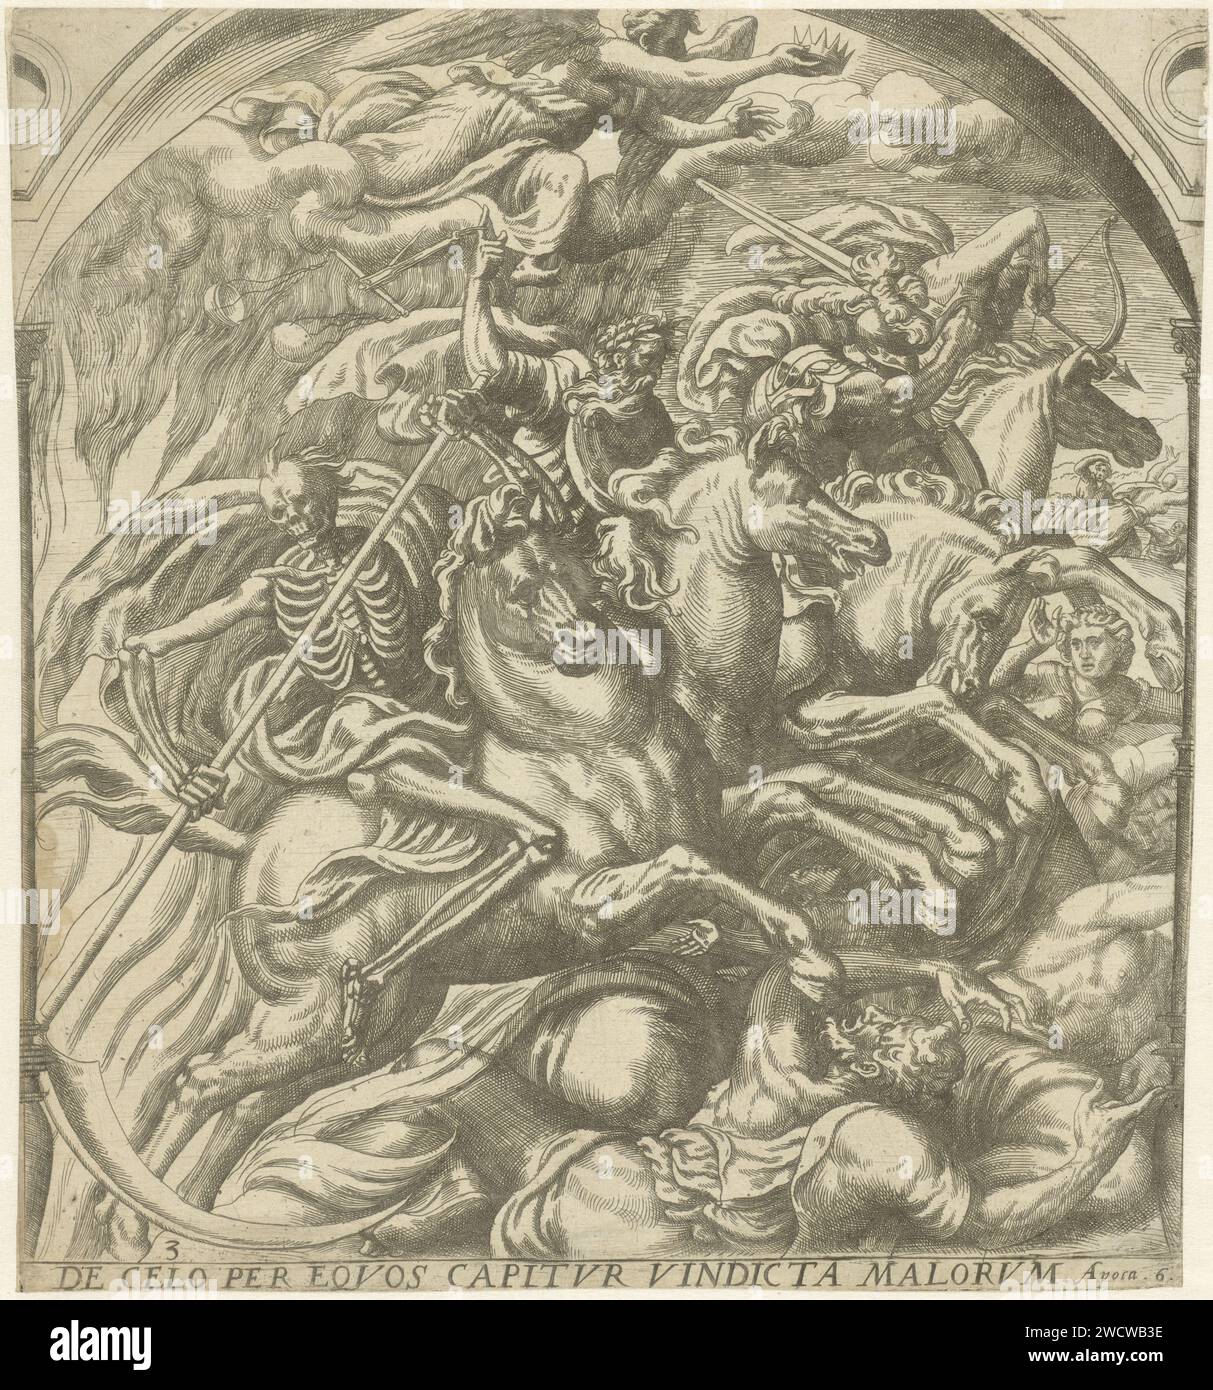 Four riders of the Apocalypse, Gerard van Groeningen, 1563 - 1574 print The four horsemen of the Apocalypse drive through the air. From the back to the front: the victor with a bow, war with a large sword, hunger with a scale and death with a scythe (op. 6: 1-8). An angel flies in the air who crowns the victor. Antwerp paper etching / engraving the four horsemen of the Apocalypse Stock Photo